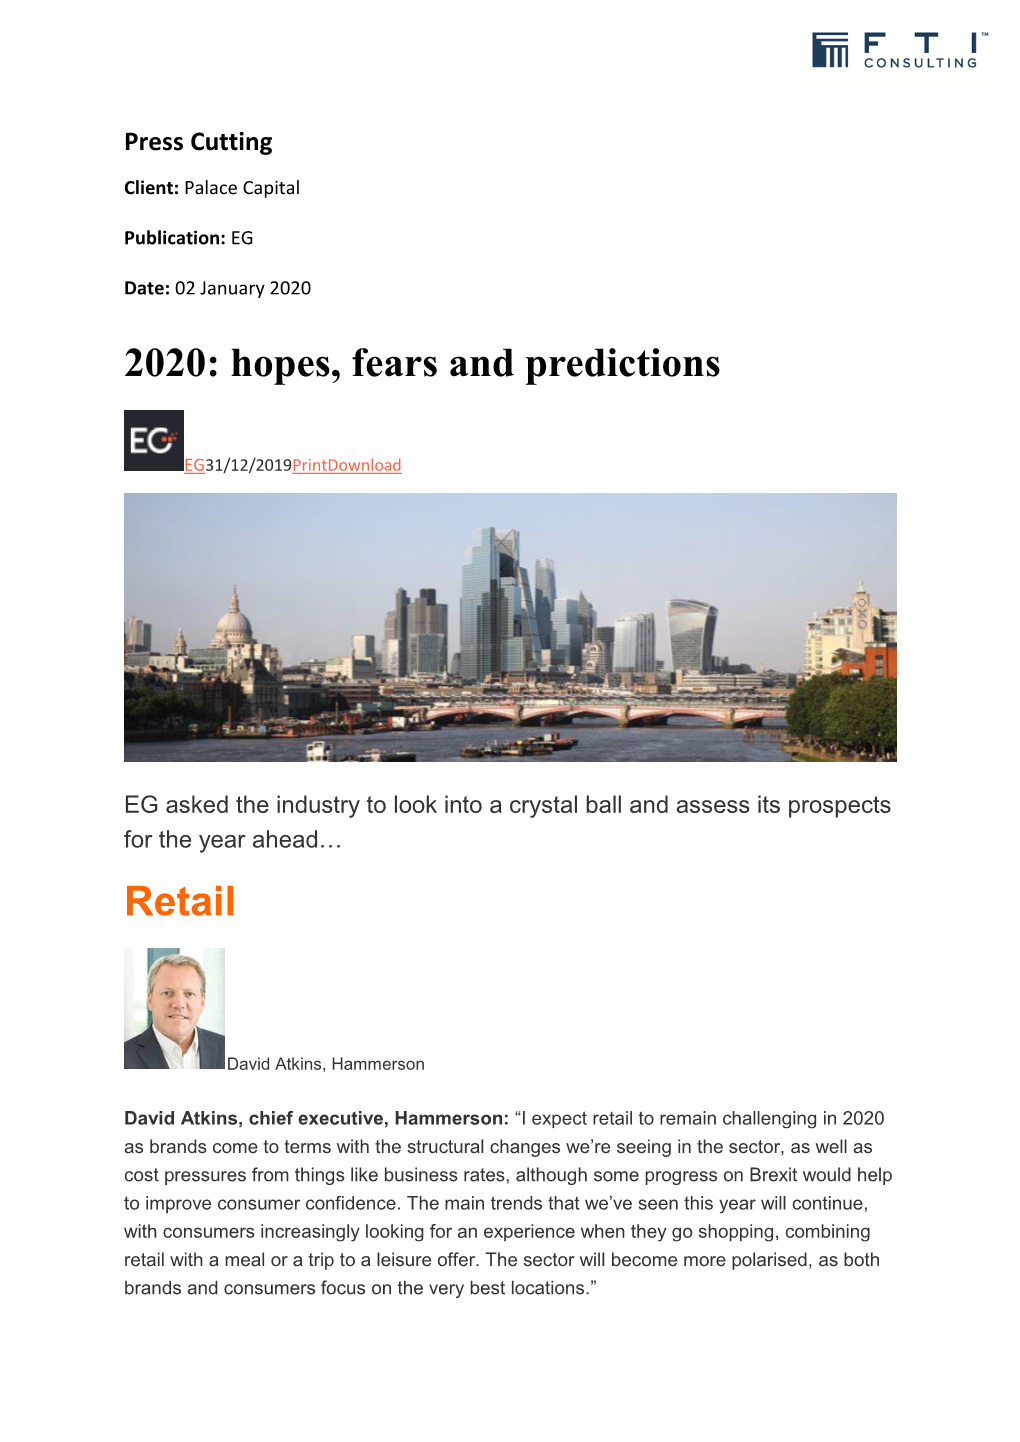 2020: Hopes, Fears and Predictions Retail